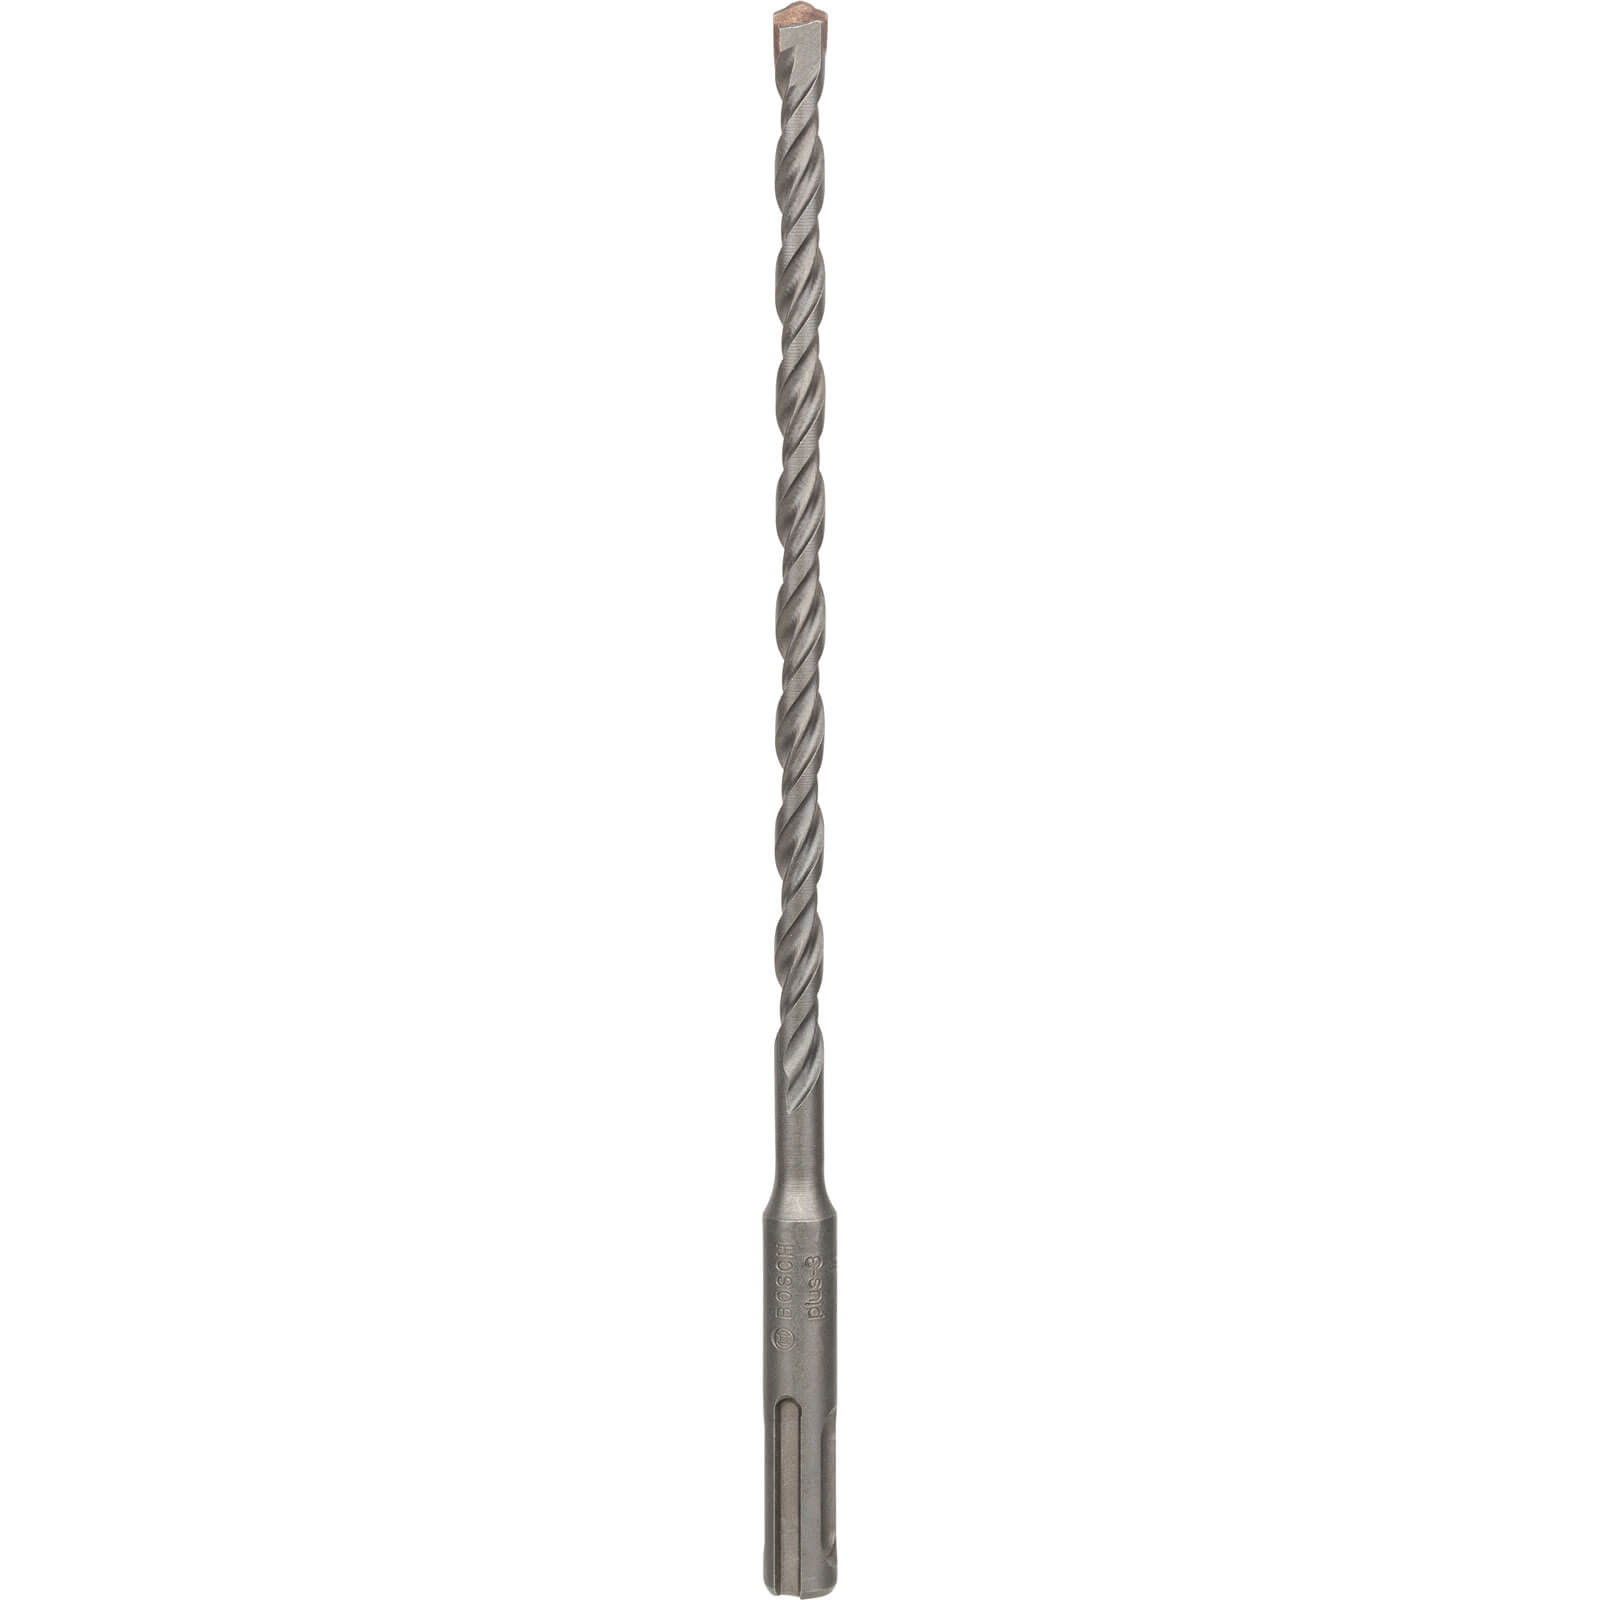 Image of Bosch Series 3 SDS Plus Masonry Drill Bit 8mm 210mm Pack of 1